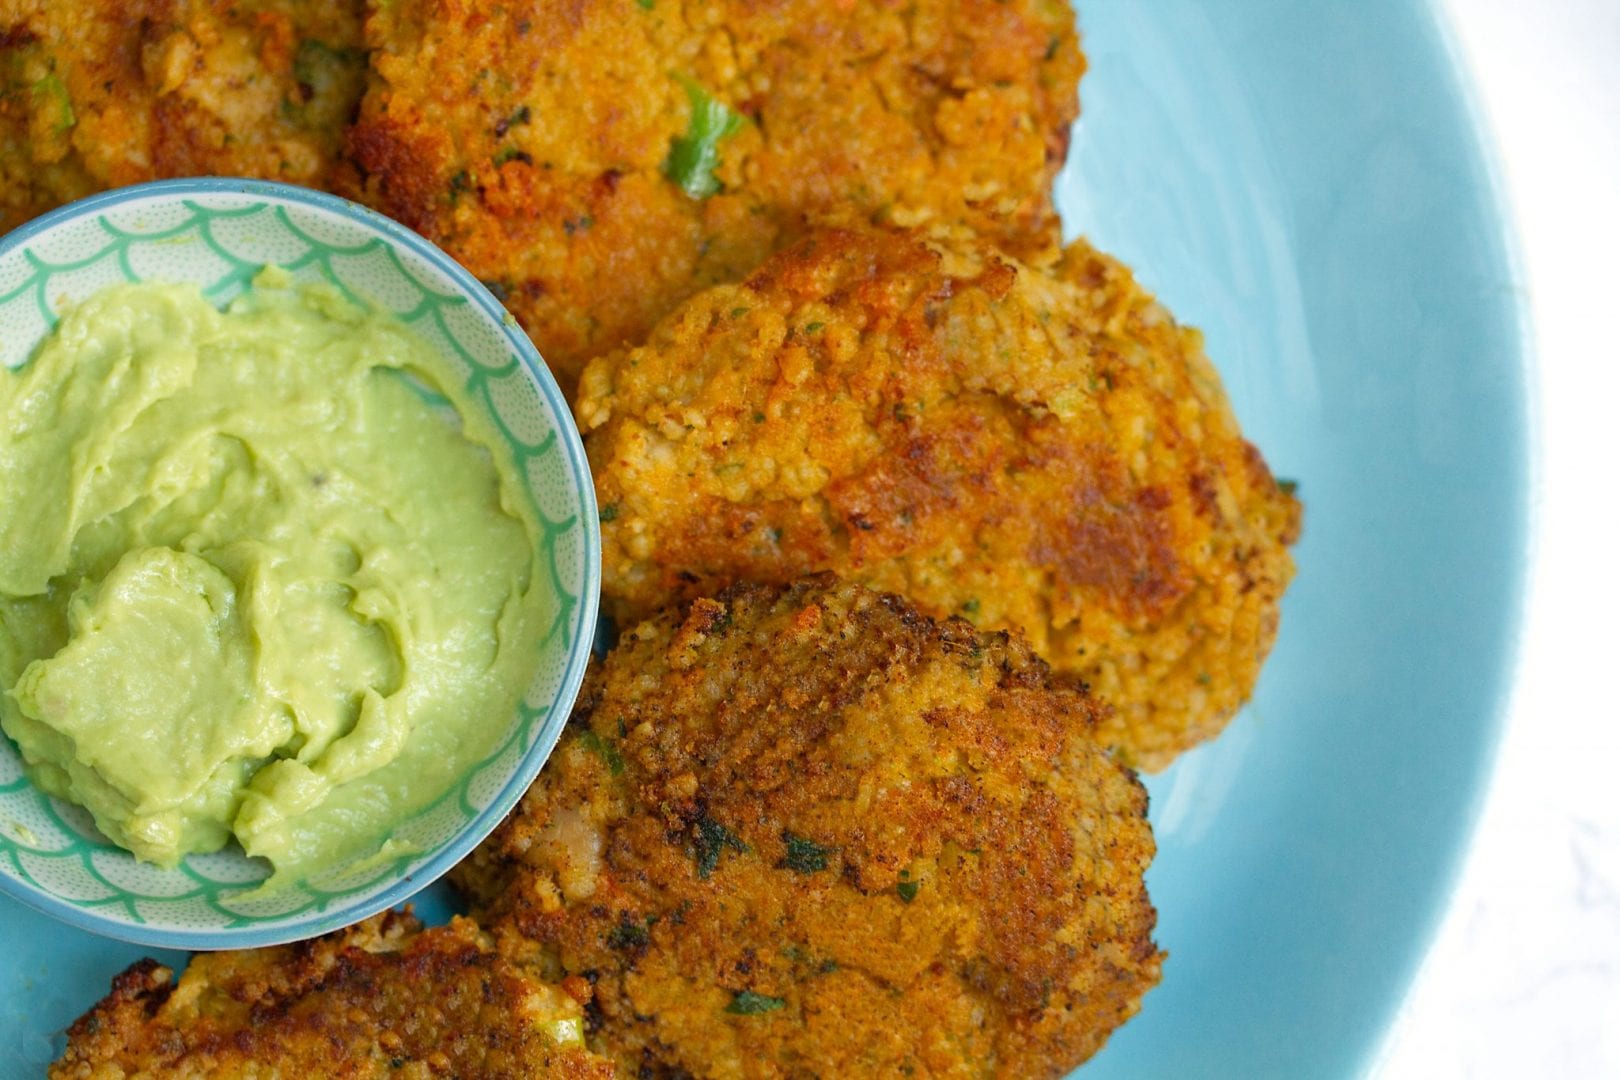 sweet potato patties - enjoy these sweet potato and chick pea patties as a veggie burger or as a weaning food